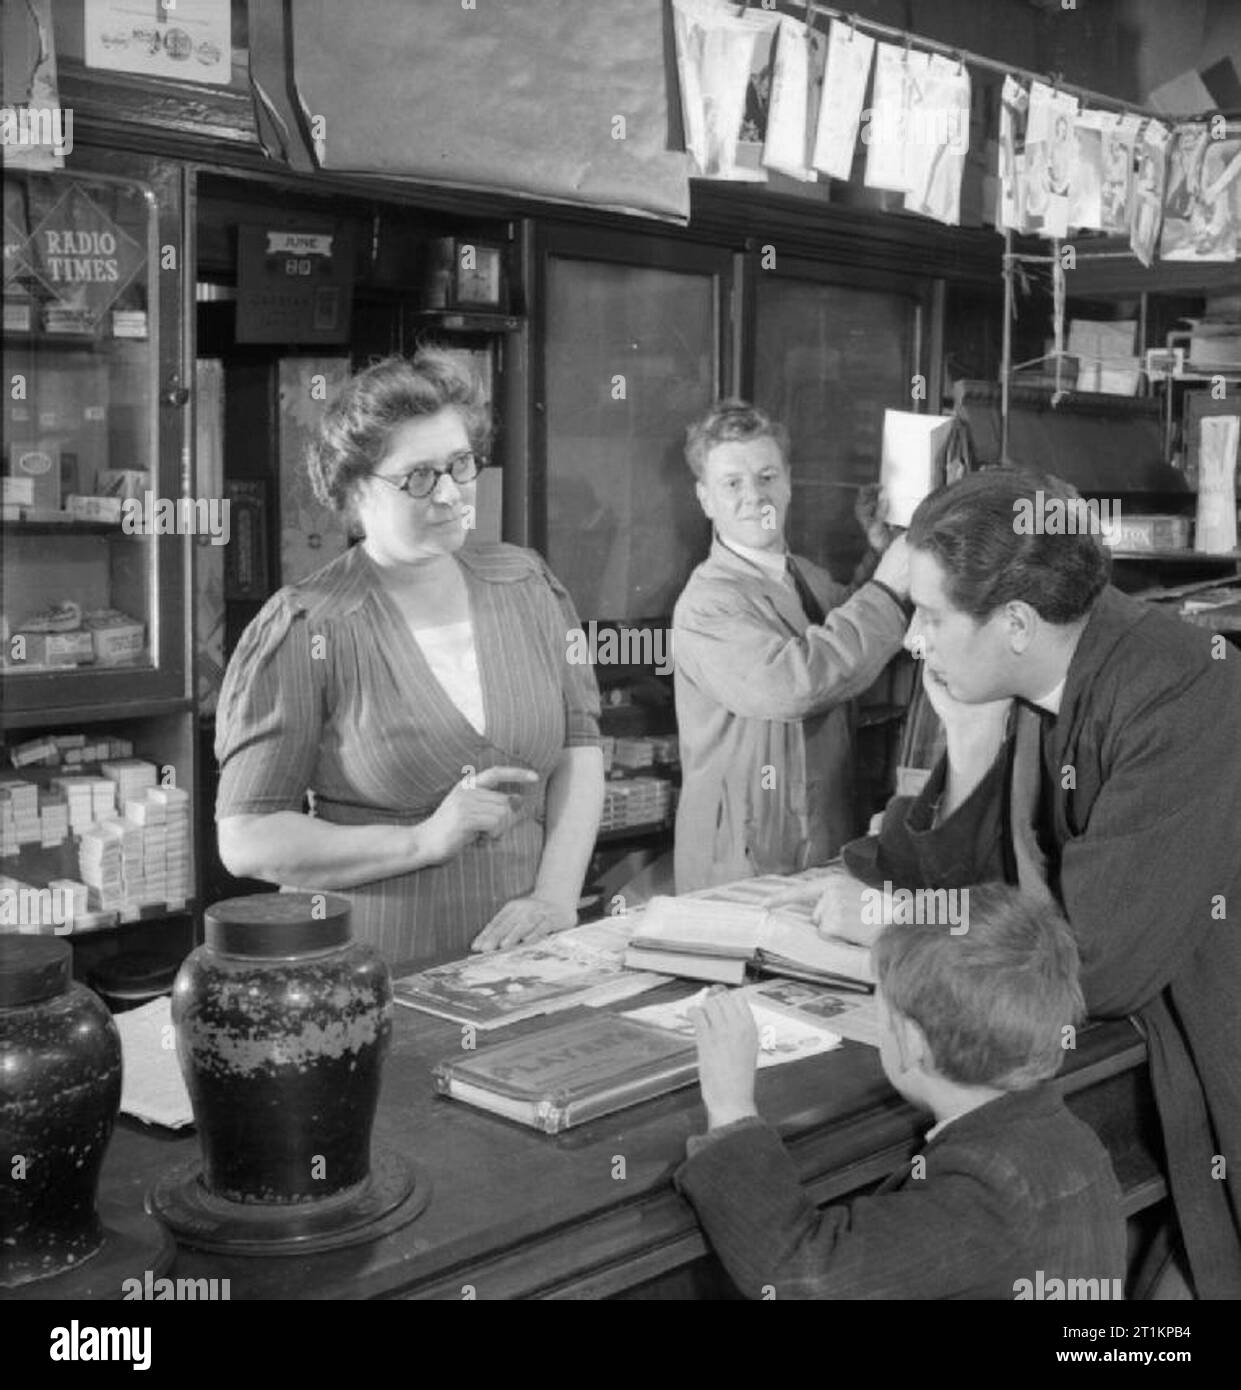 Parish Priest- the work of the Vicar of St Mark's Church, Victoria Docks, Silvertown, London, England, UK, 1944 Reverend Joseph Stephens runs through the music for Sunday service with newsagent and church organist Mrs Fry in her shop in Silvertown. A small boy stands next to Rev Stephens as he waits to buy stamps from Mr Fry, who is working behind the counter with his wife. Stock Photo